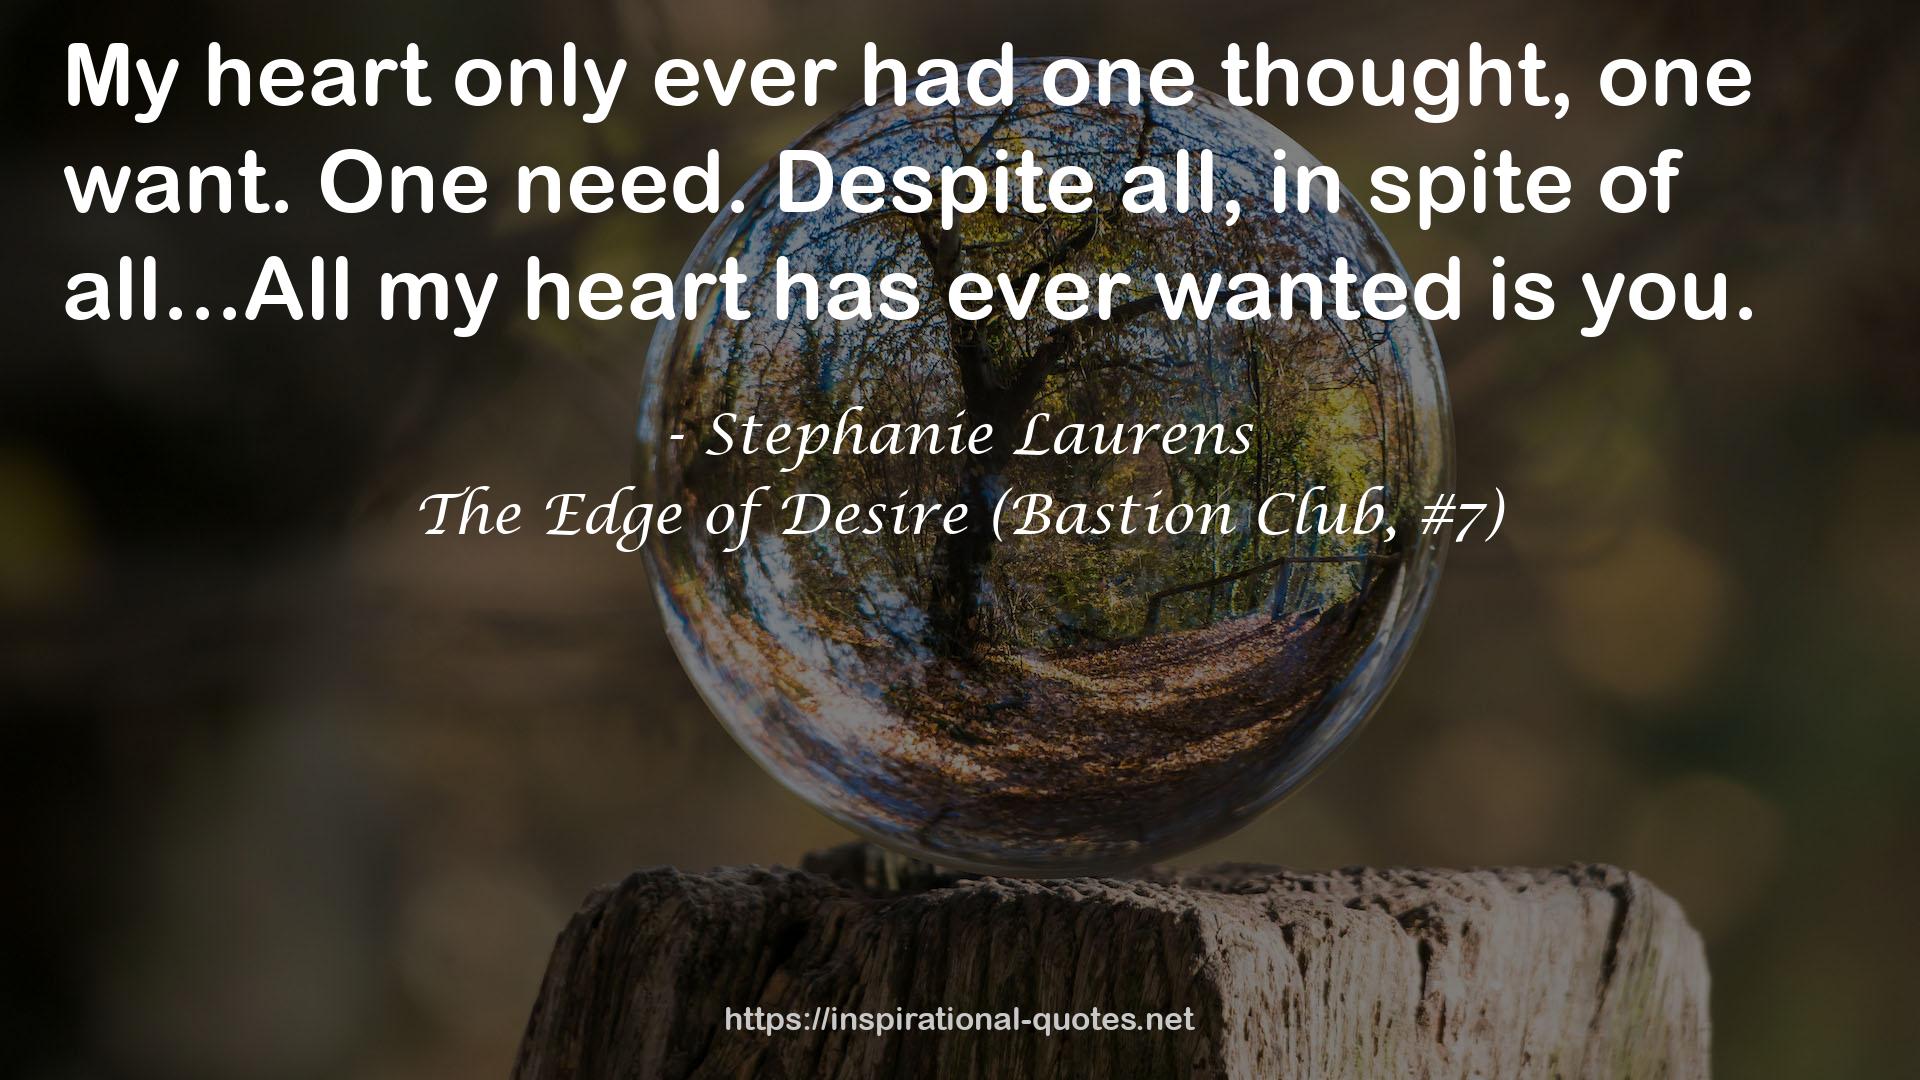 The Edge of Desire (Bastion Club, #7) QUOTES